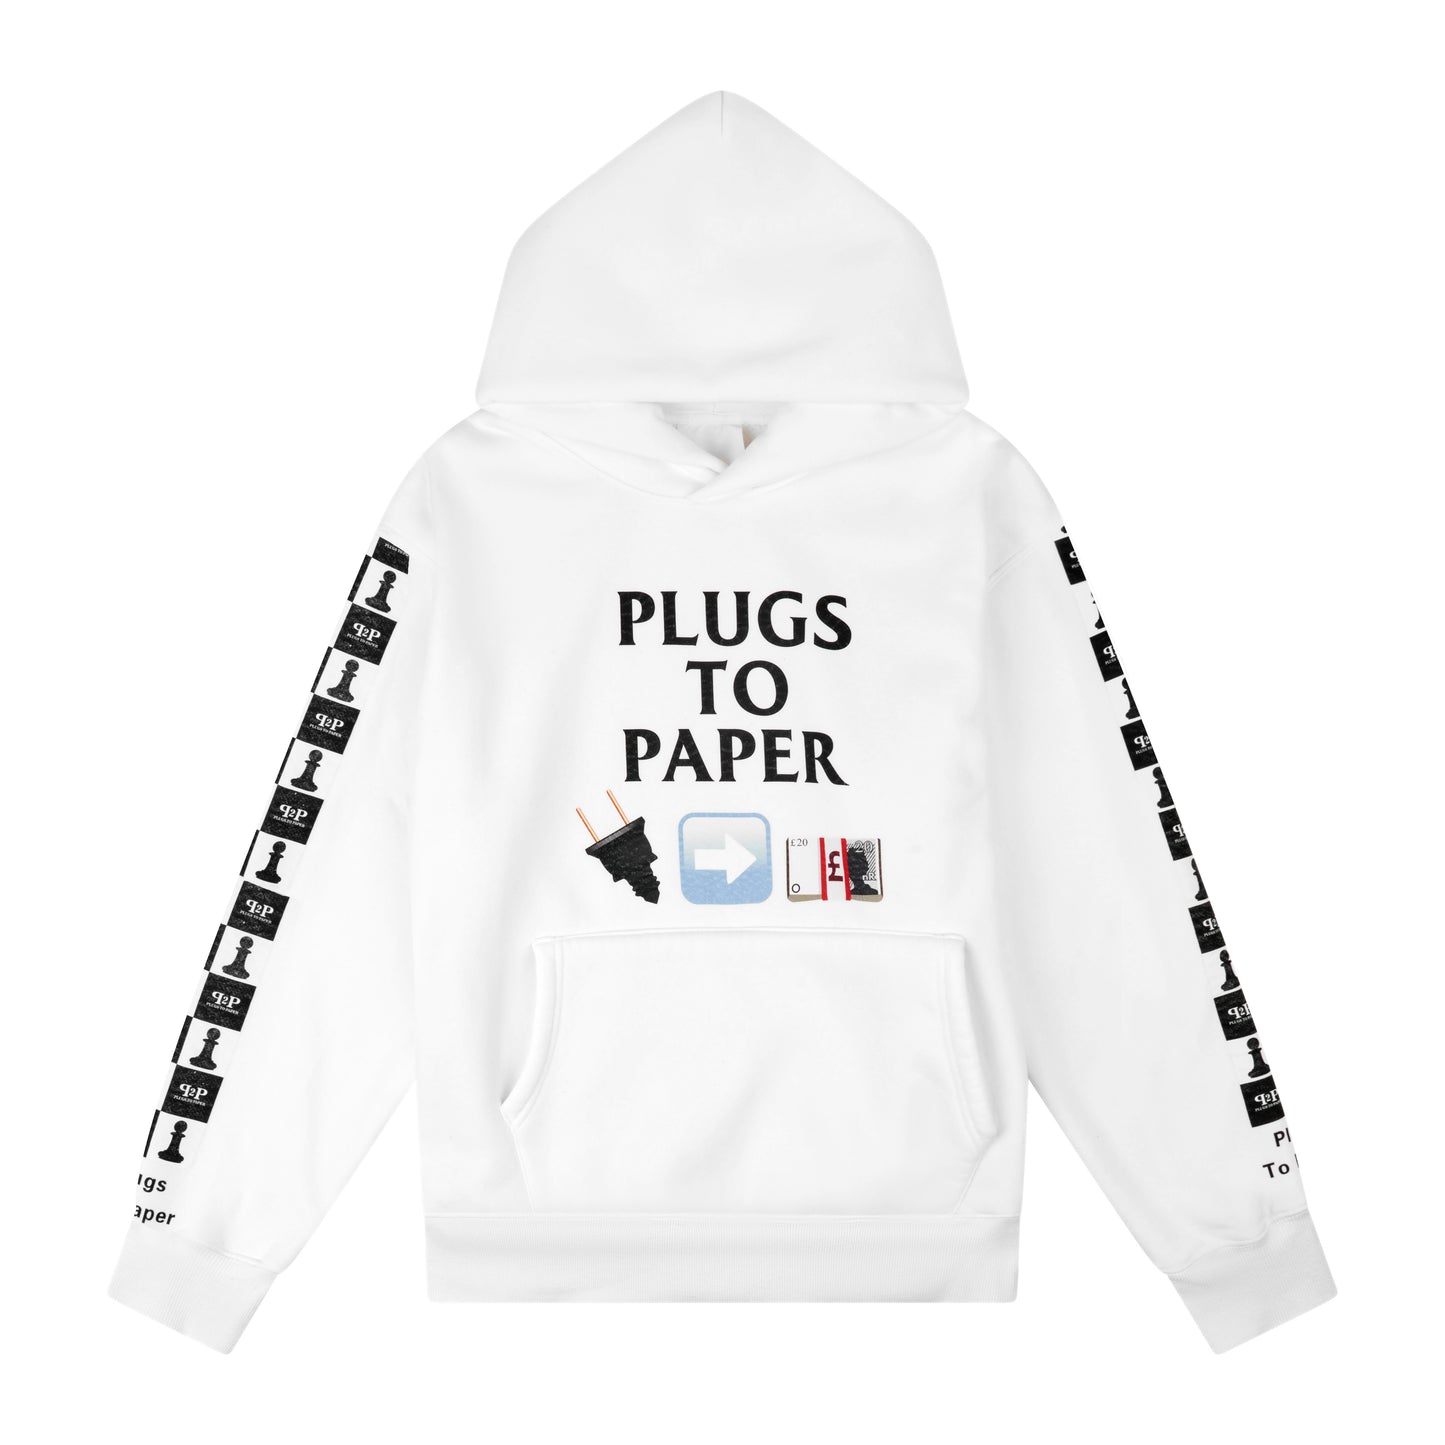 PLUGS TO PAPER Hoodie - White